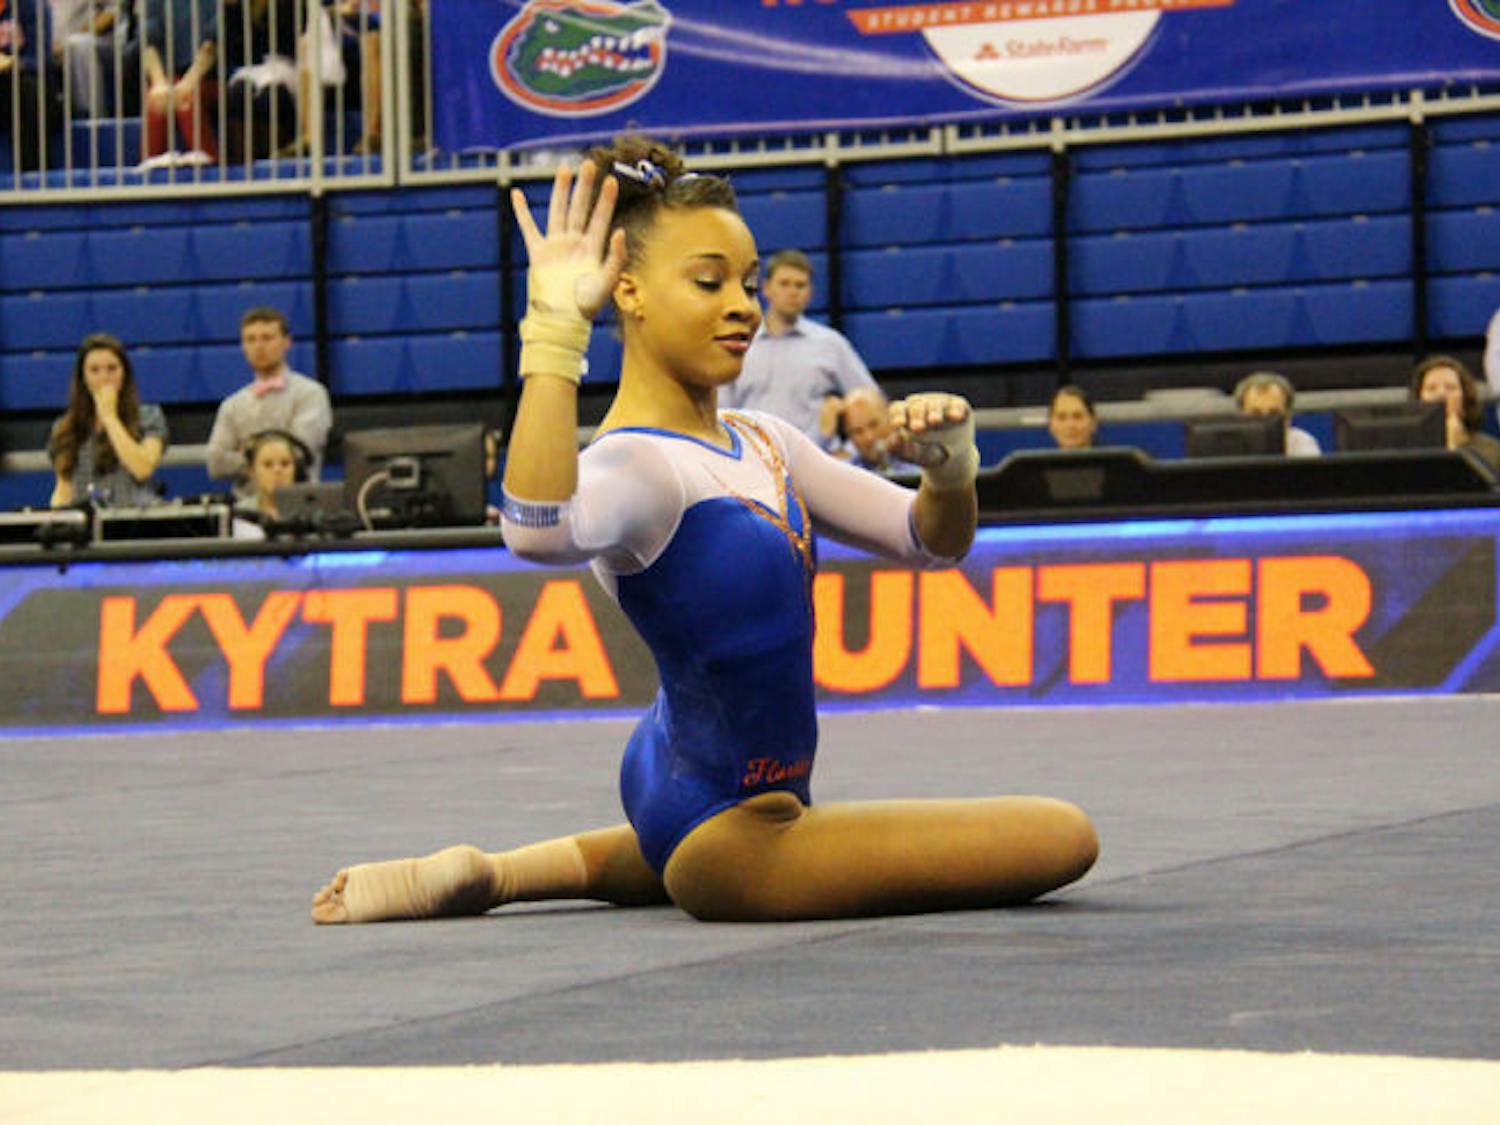 Kytra Hunter performs a floor routine on Friday in the O’Connell Center. Hunter scored a perfect 10 on the floor exercise for the second straight meet — the first consecutive 10s in program history.